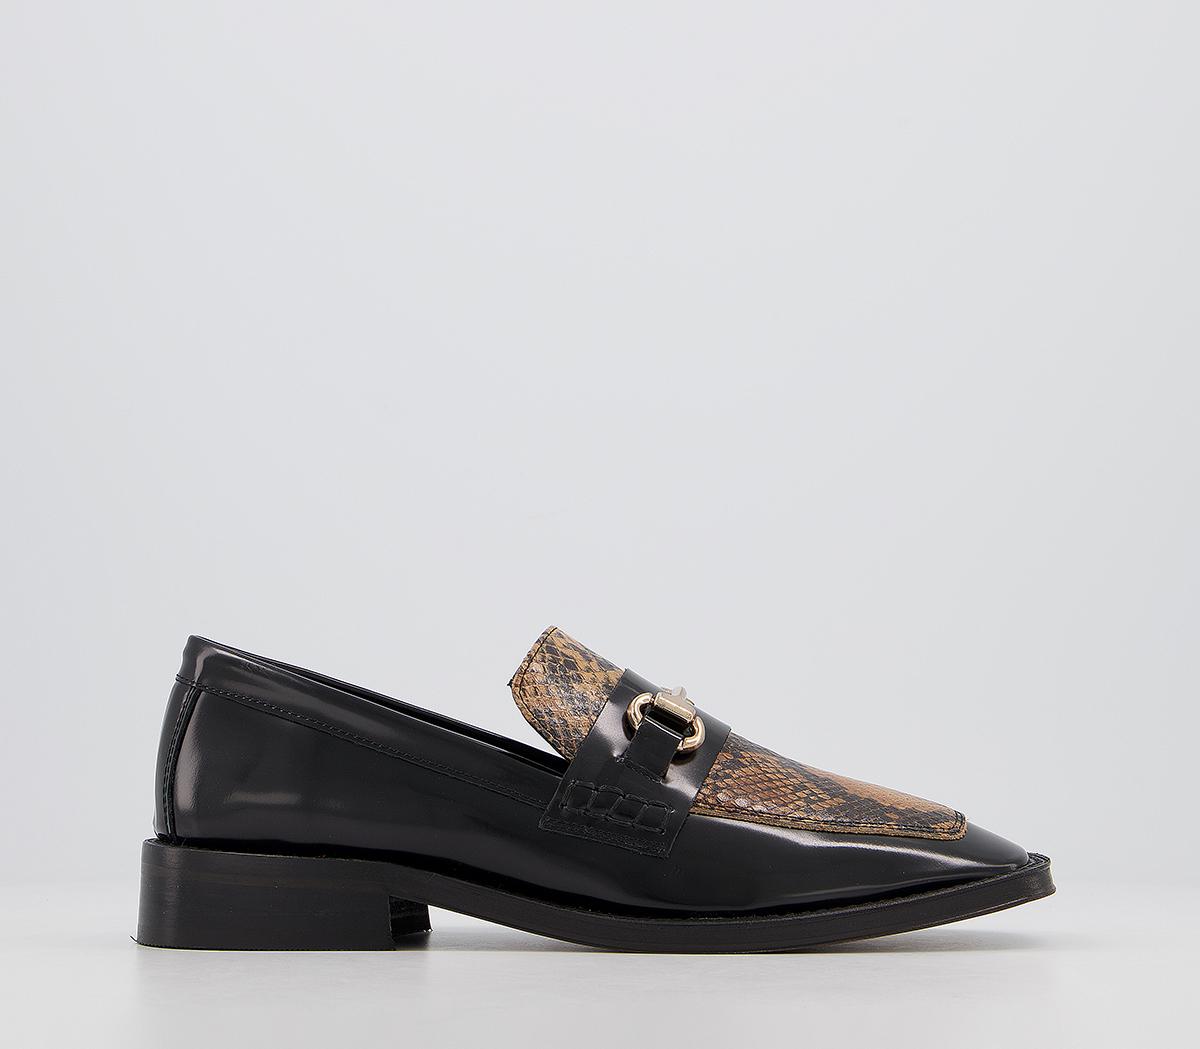 OFFICEFreed Square Toe LoafersBlack Leather Snake Mix